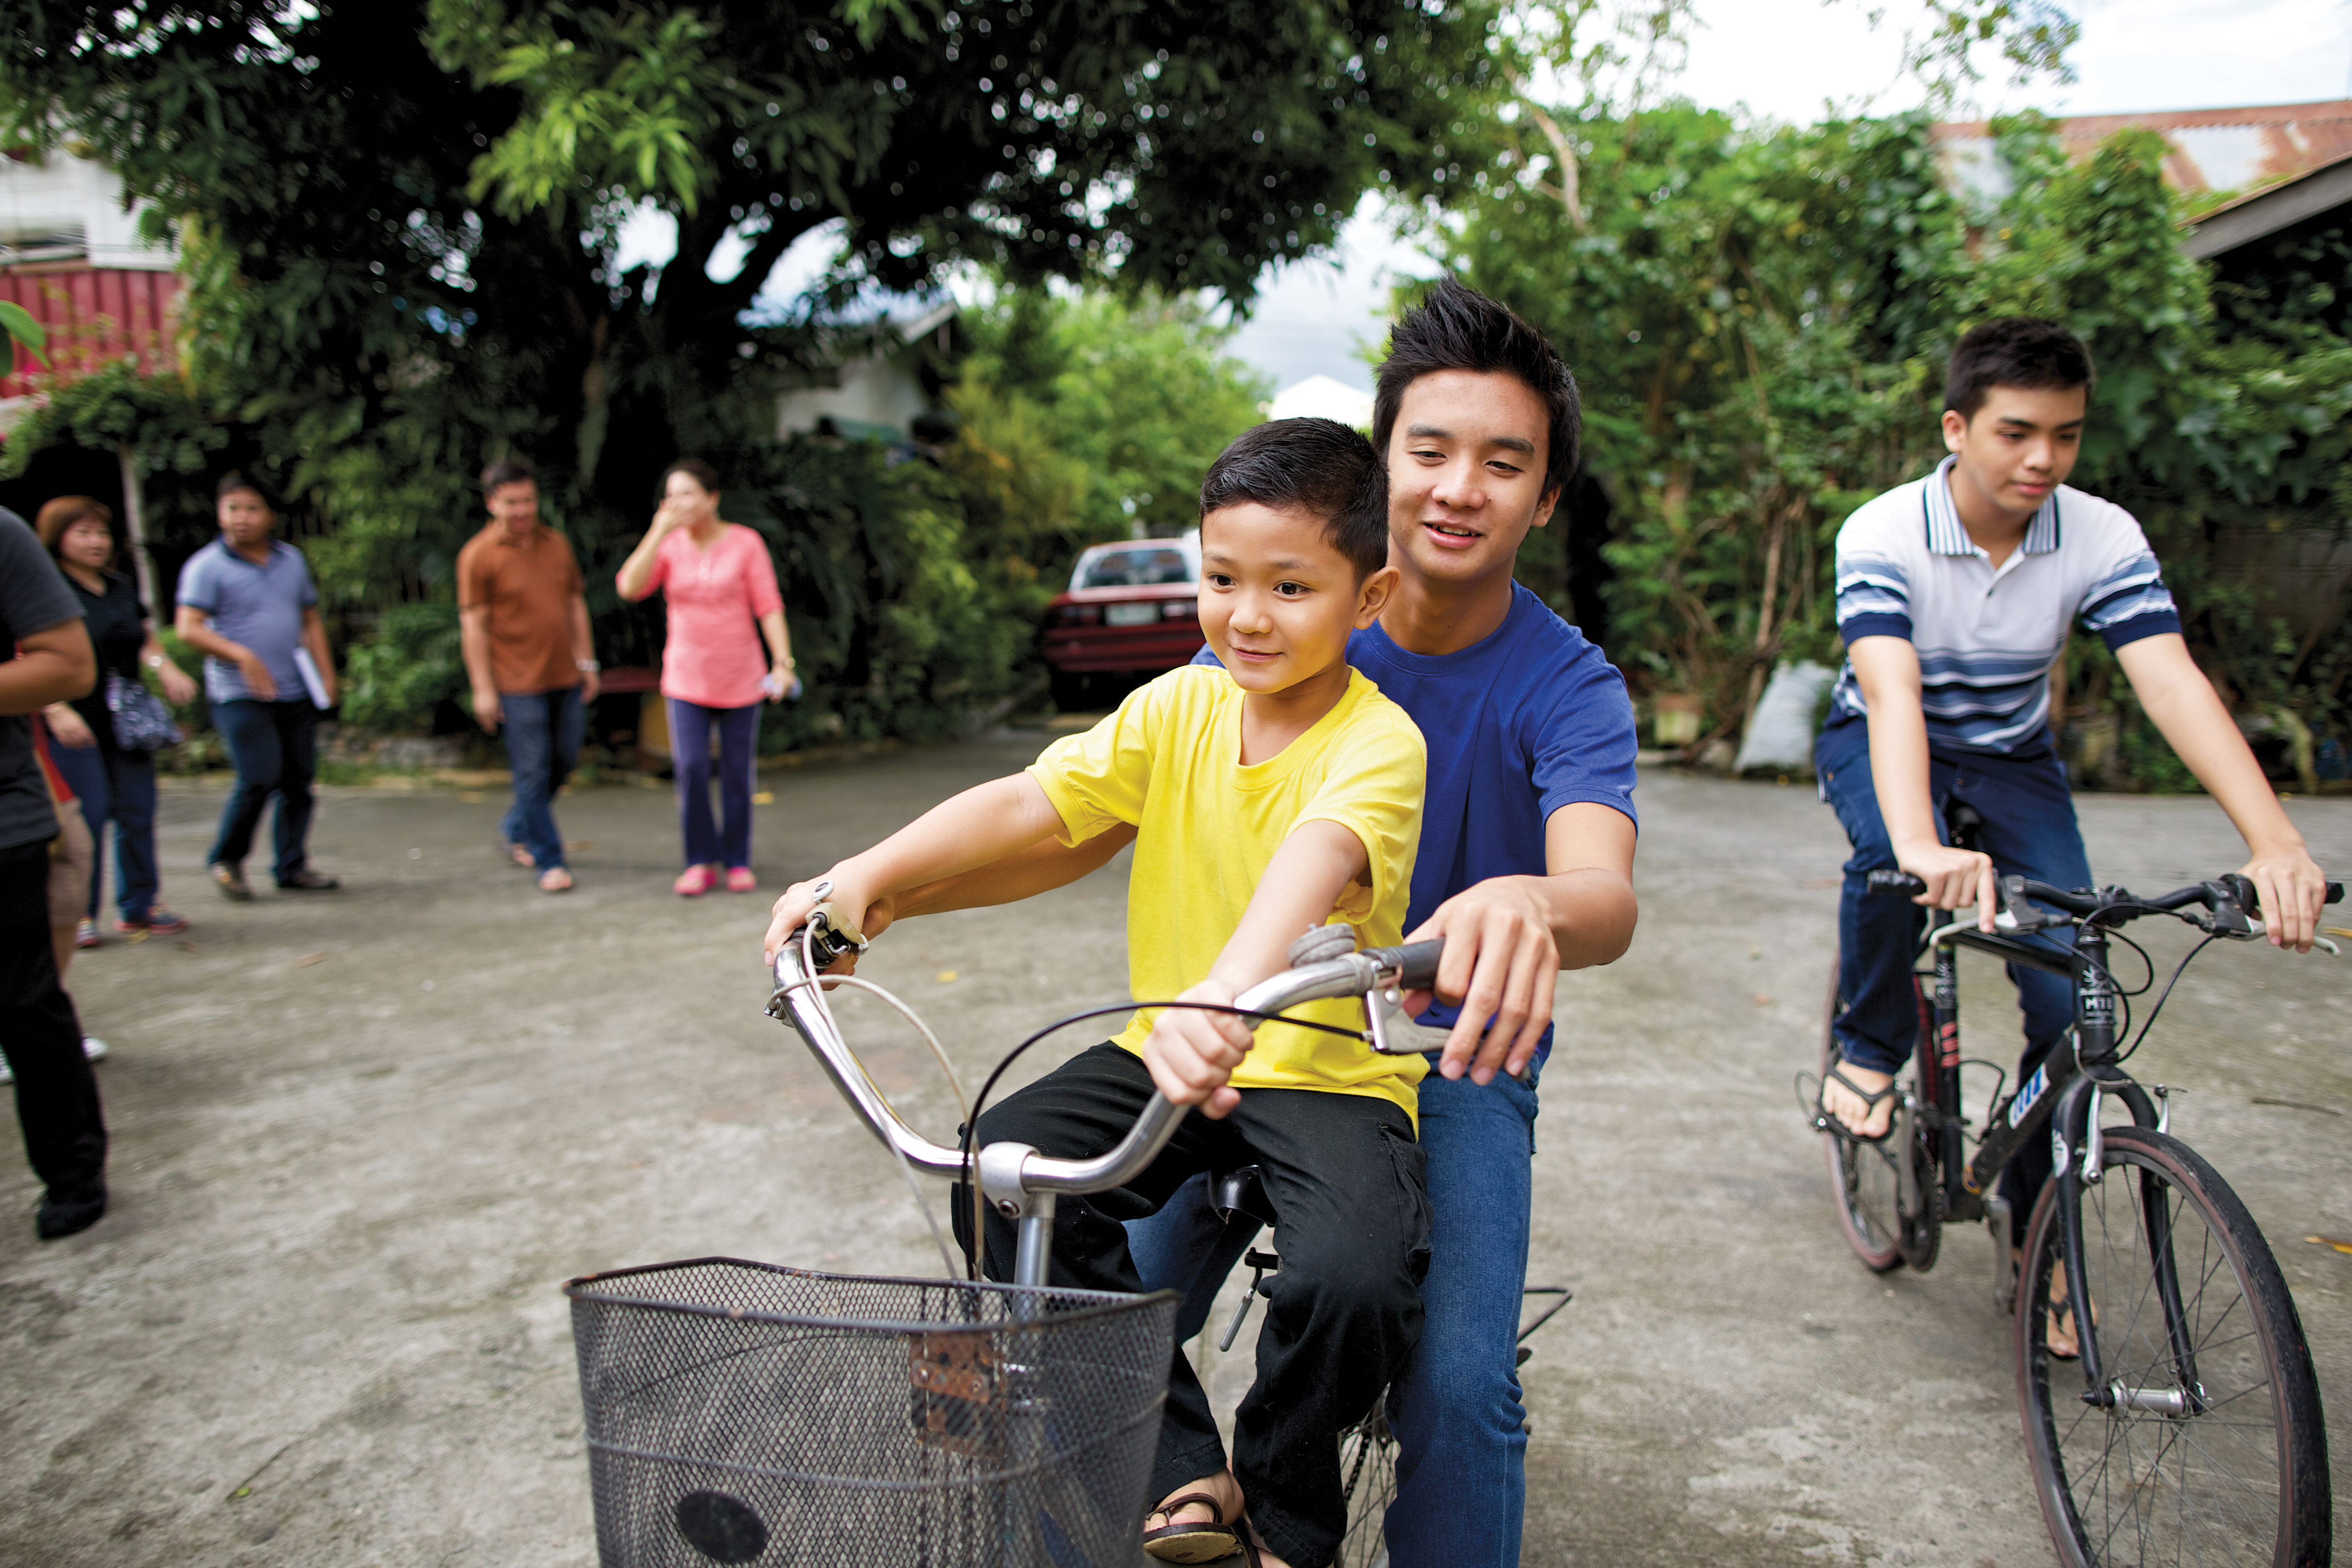 A young boy in a yellow T-shirt rides on a bike seat in front of his older brother in a blue T-shirt, both holding the handlebars.